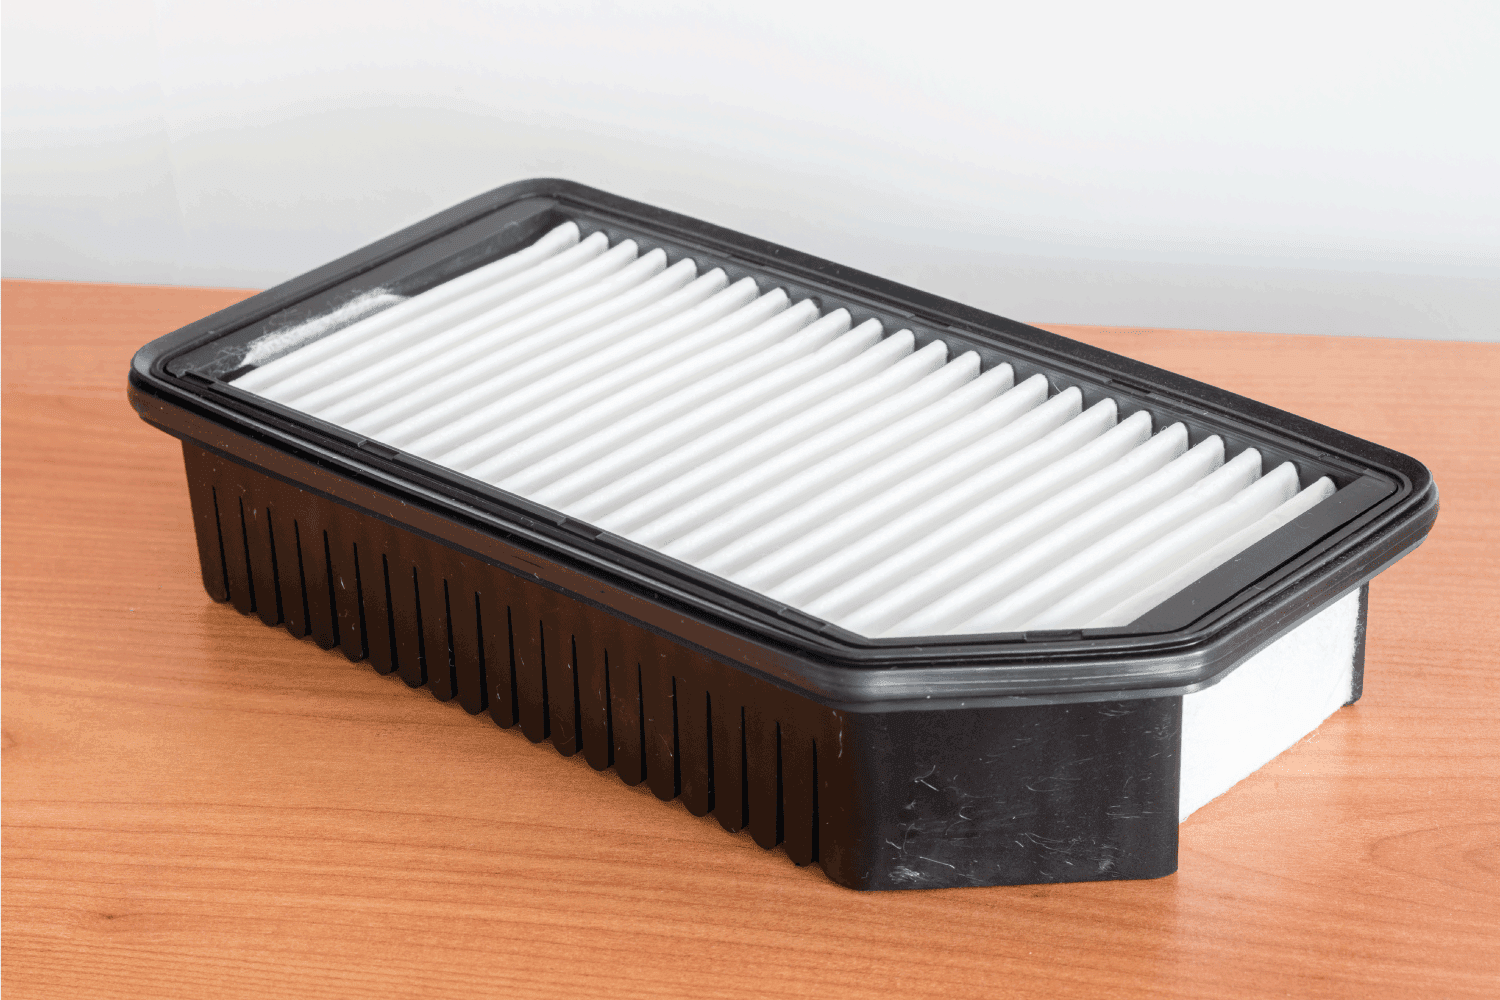 spare hepa filter on top of a wooden table